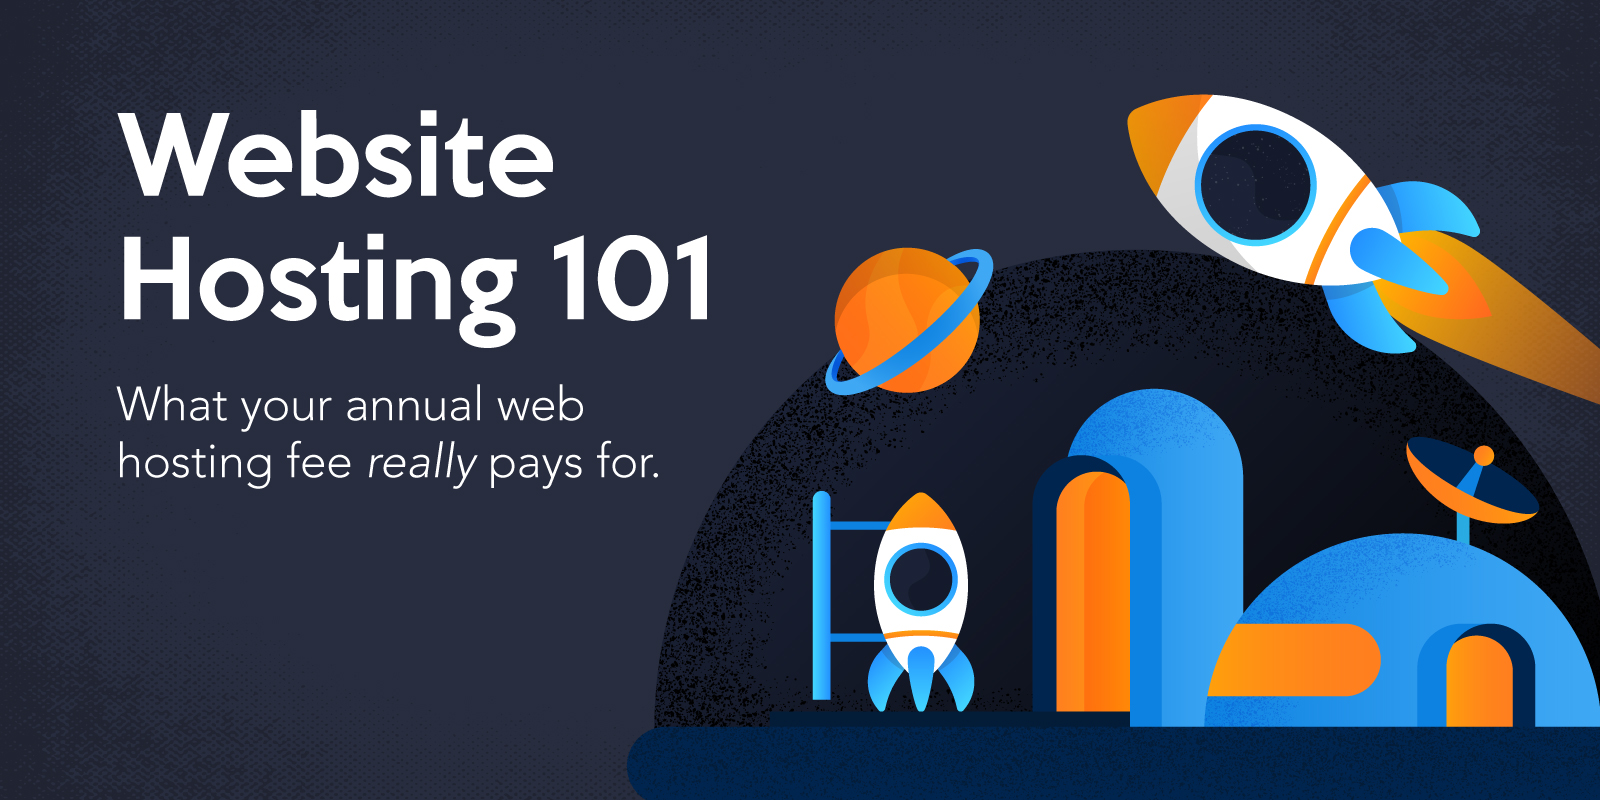 What your annual web hosting fee really pays for.